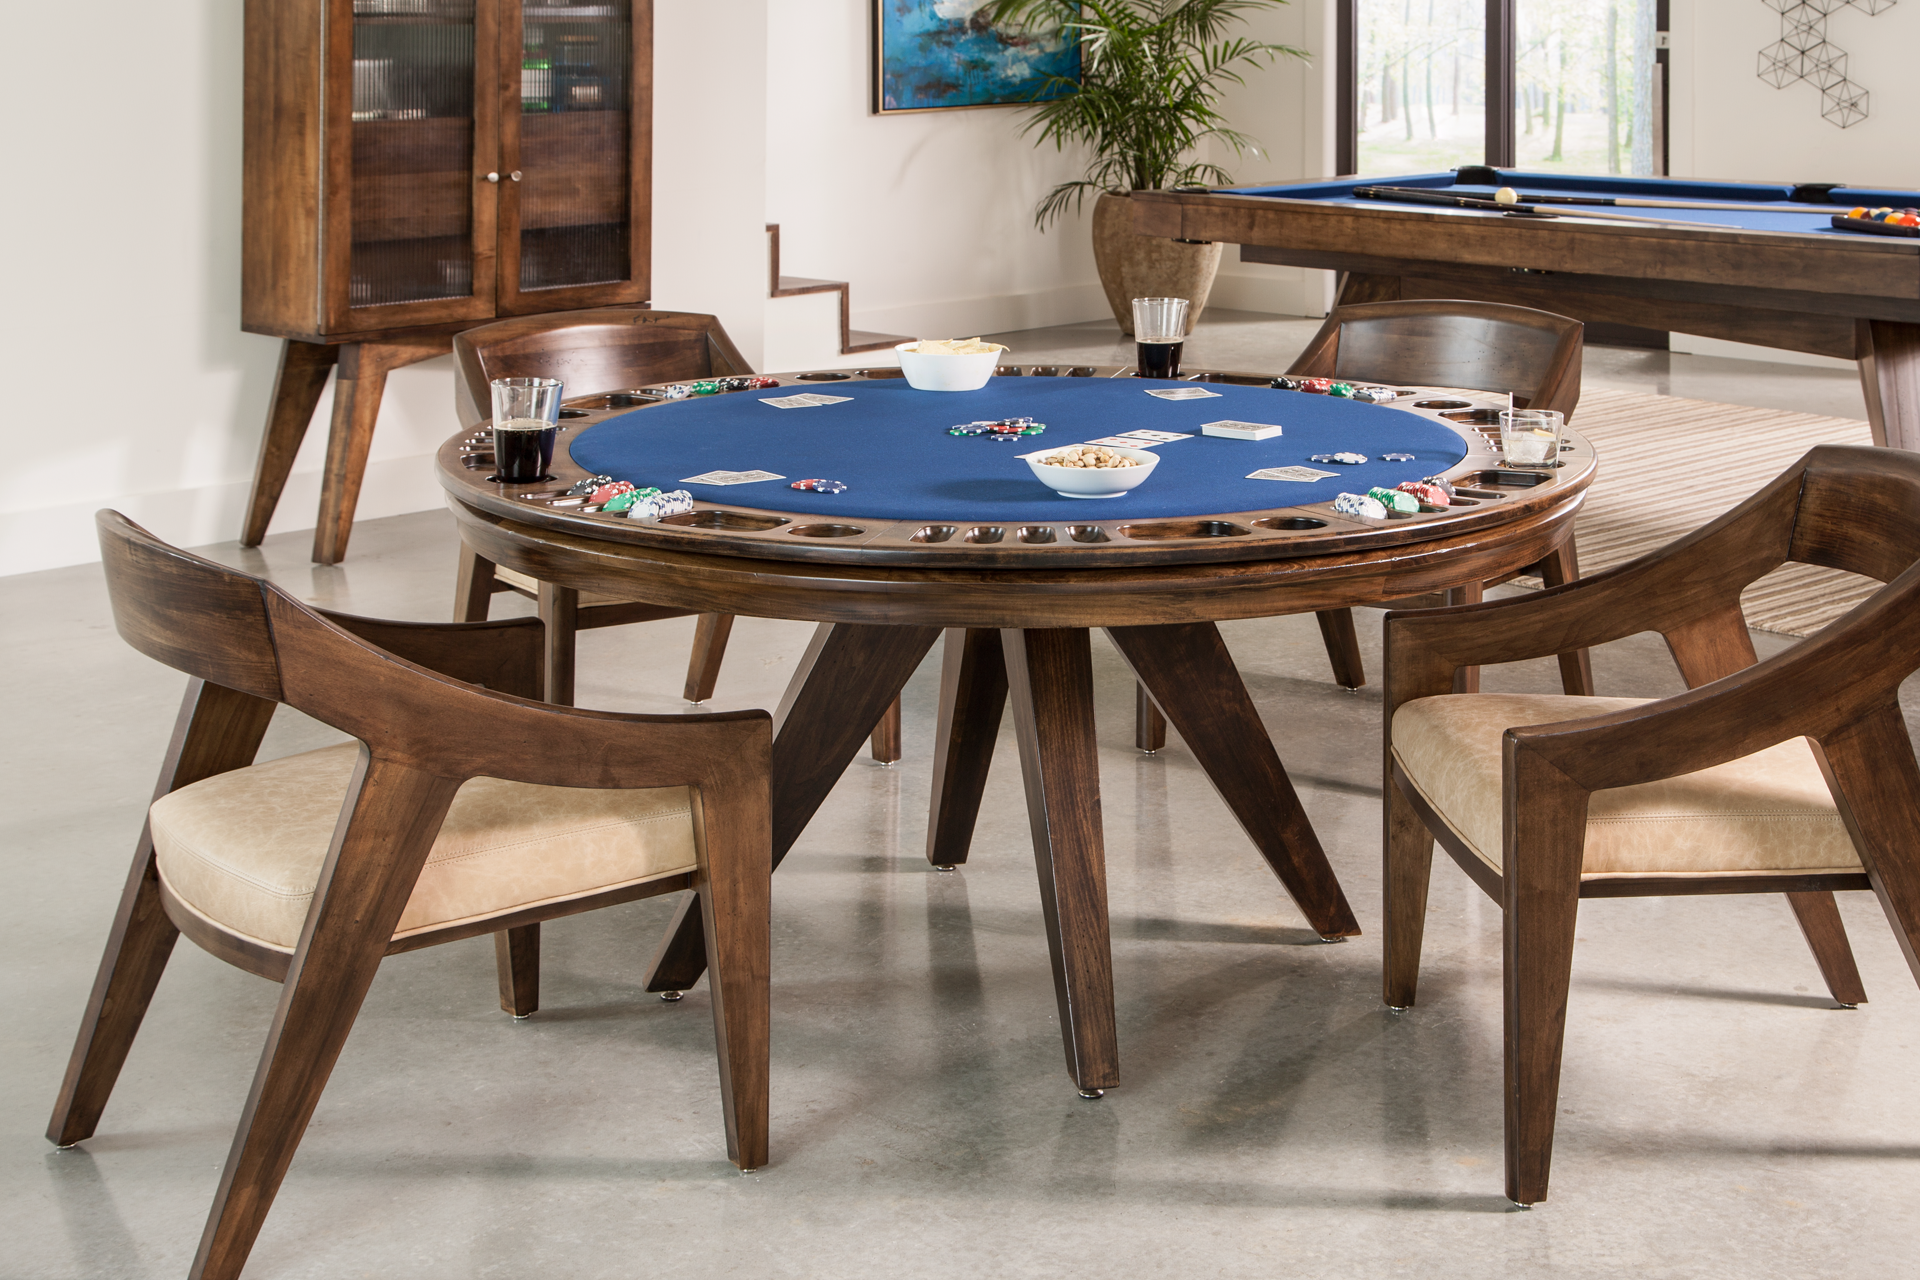 Bumper Pool Dining Room Table | Dining Room Tables